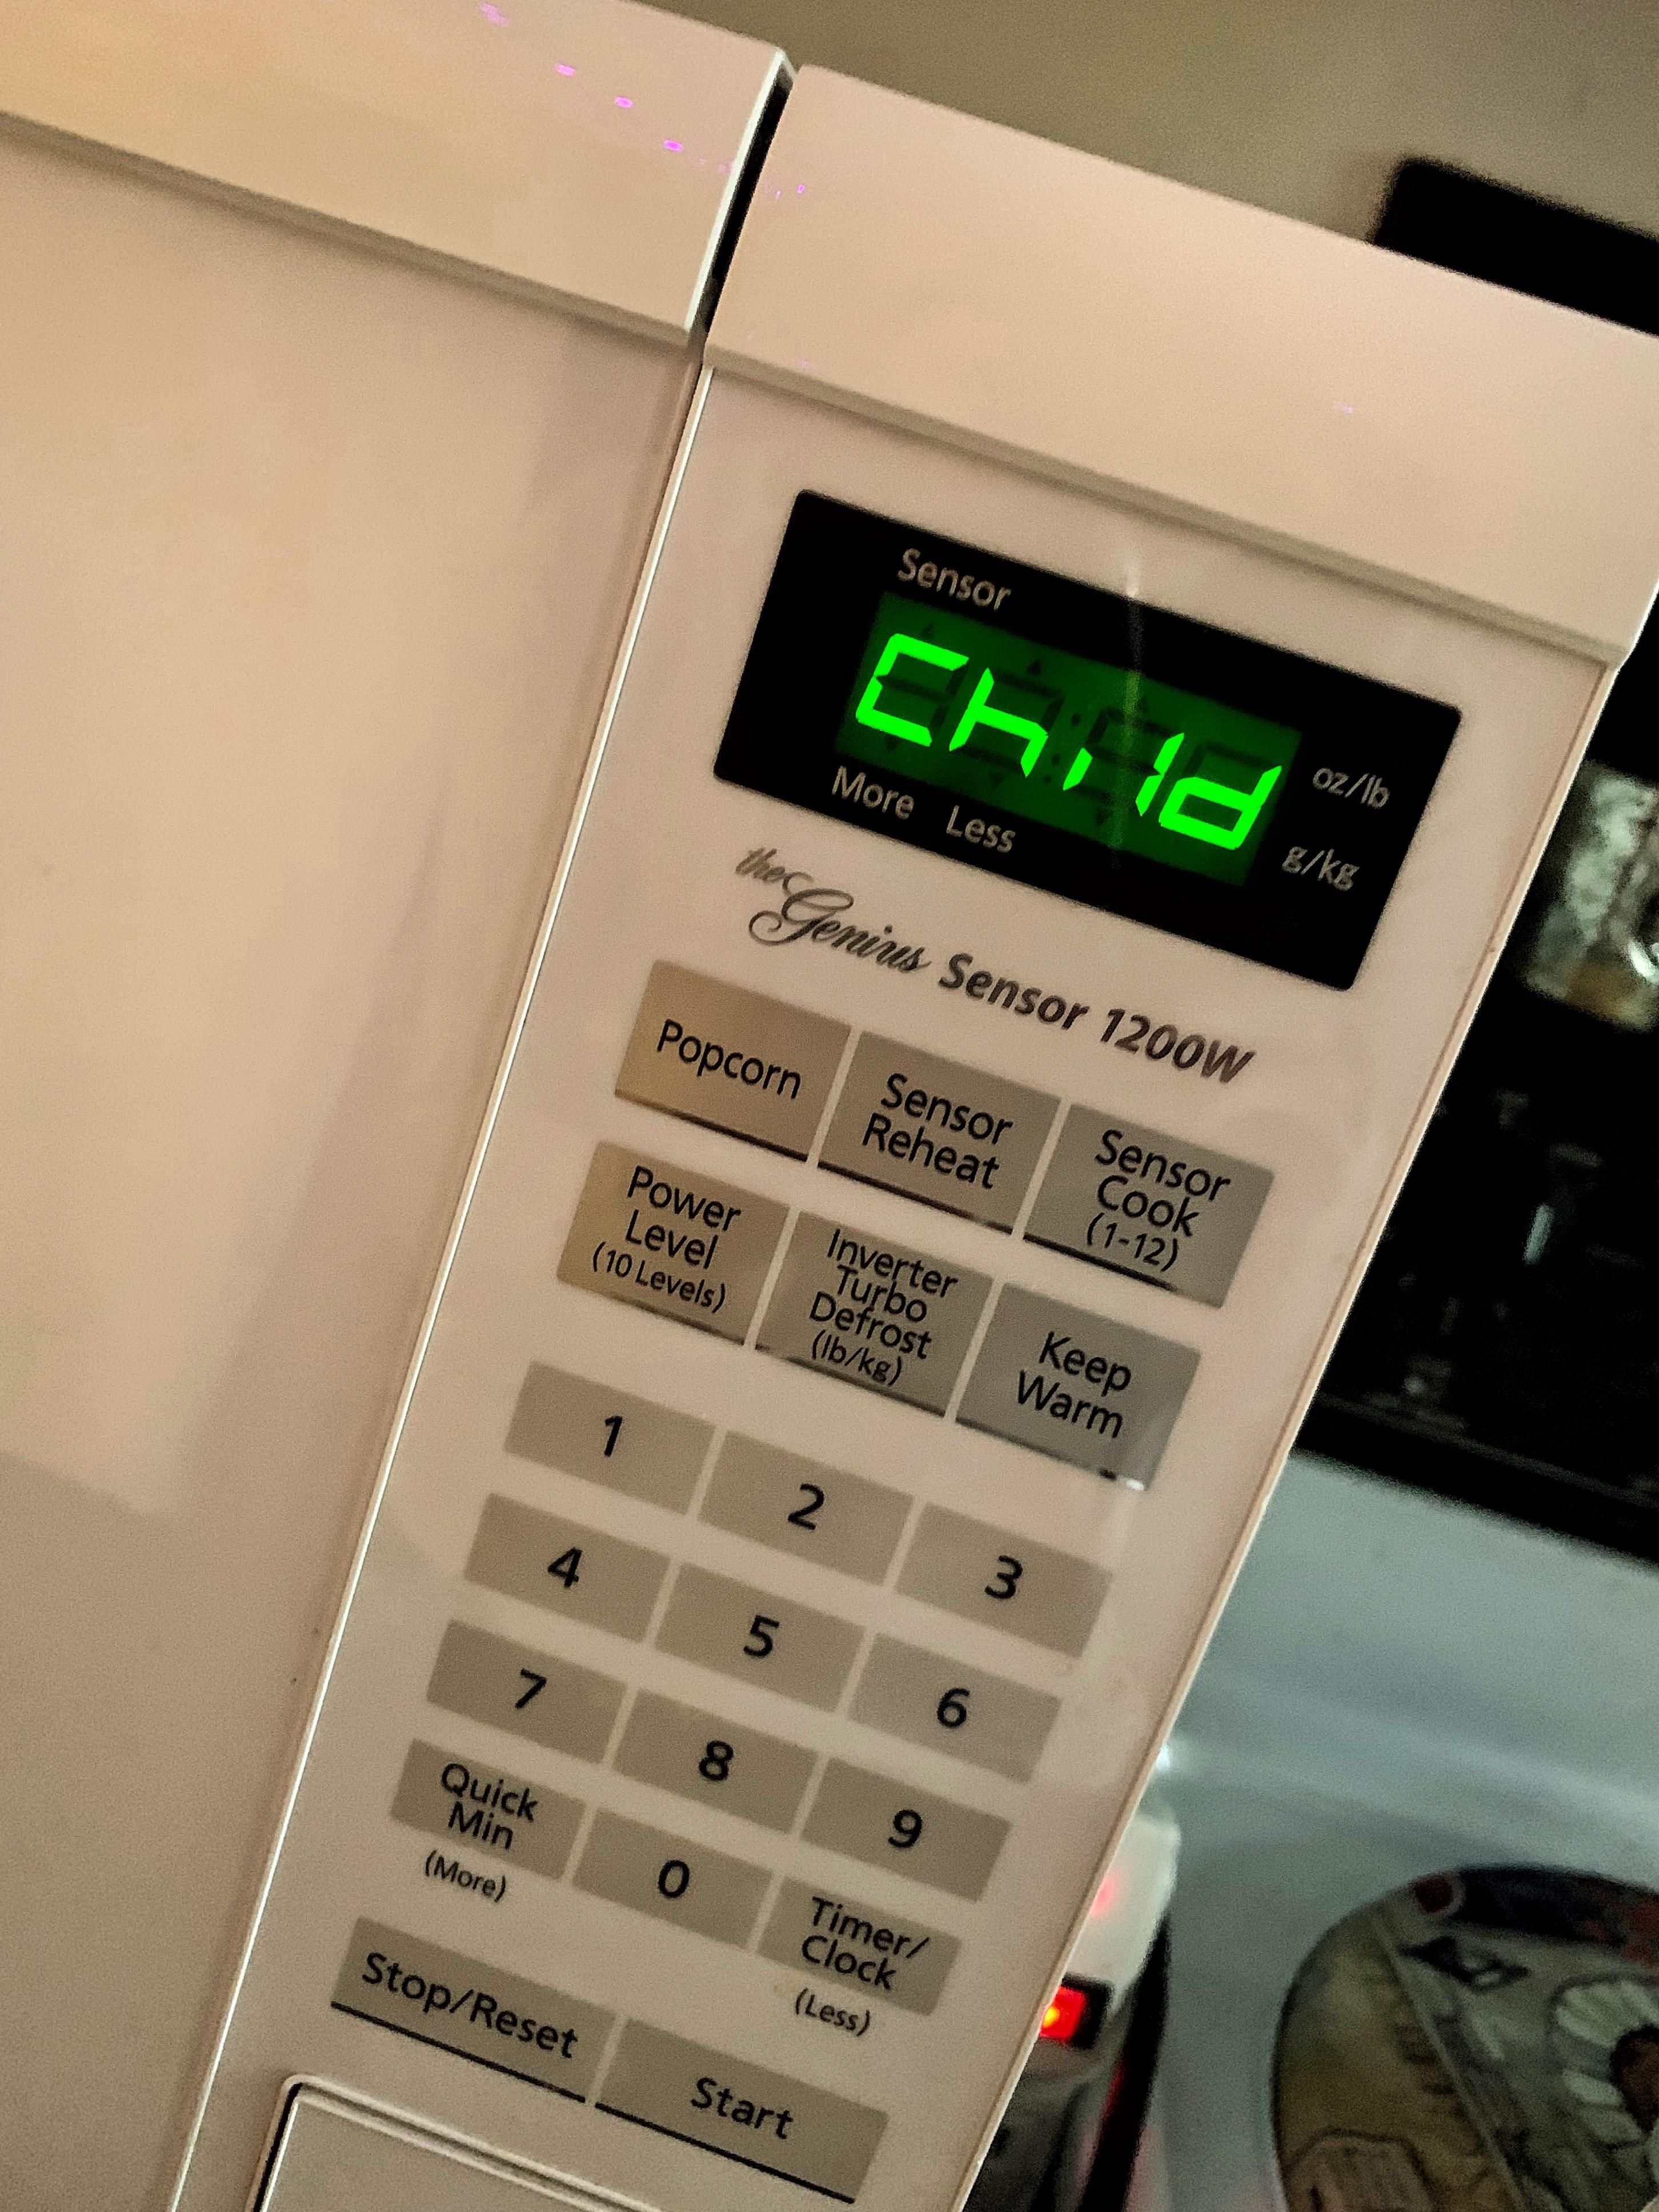 My microwave just called me a child for hitting on its top for 4 times ‘cuz the timer was all screwed up.